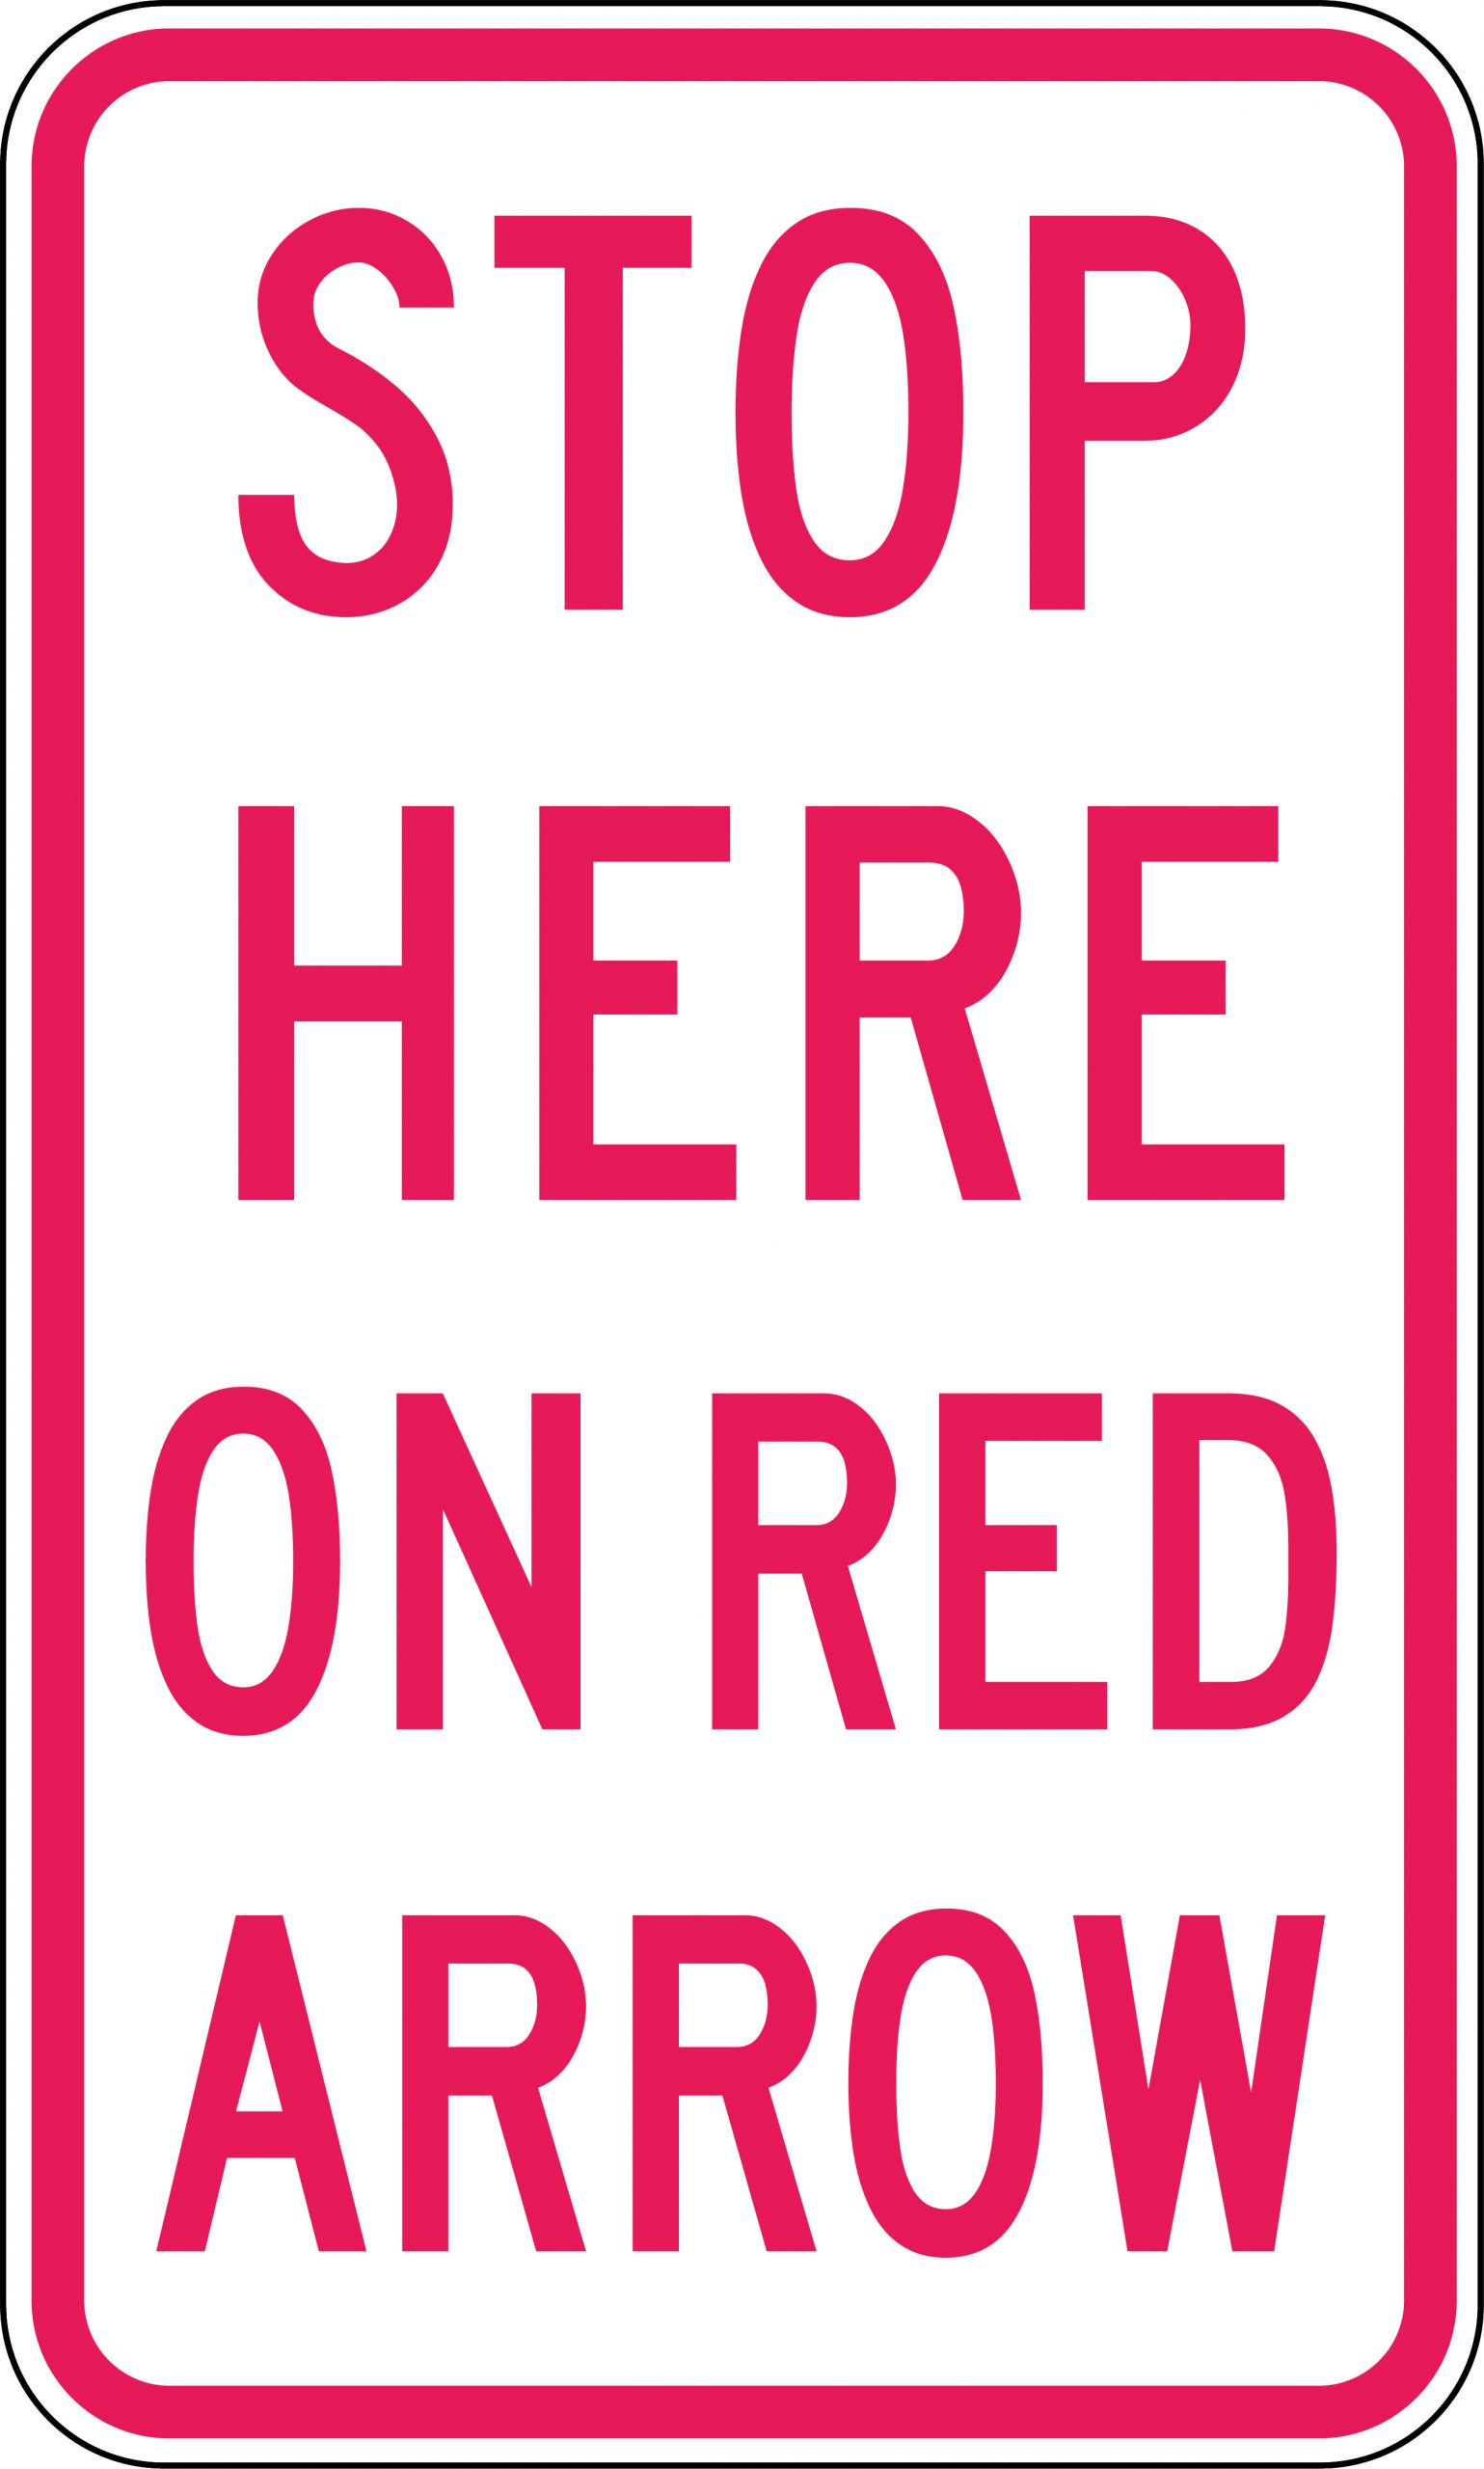 UNIFORM SAFETY 675X1125MM CL1 ALUM STOP HERE ON RED ARROW 